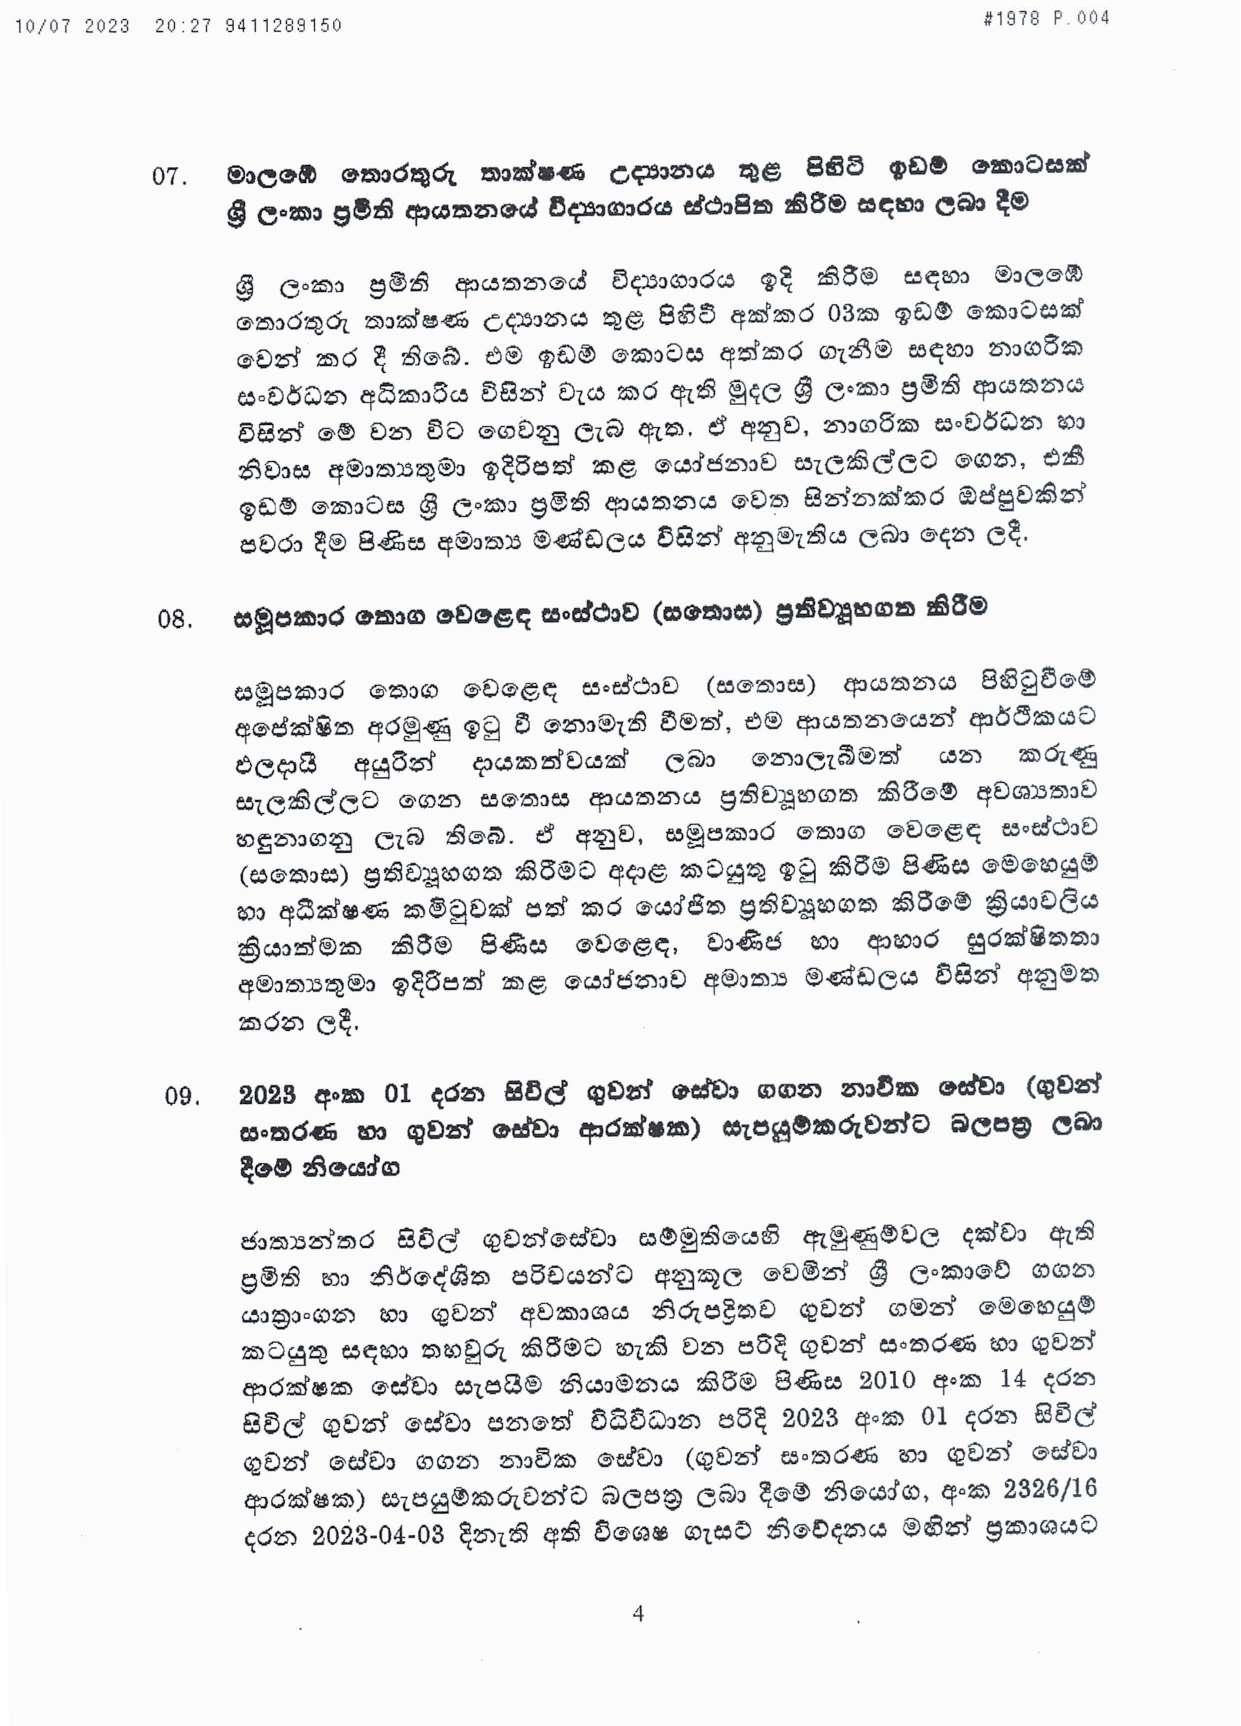 Cabinet Decision on 10.07.2023d page 004